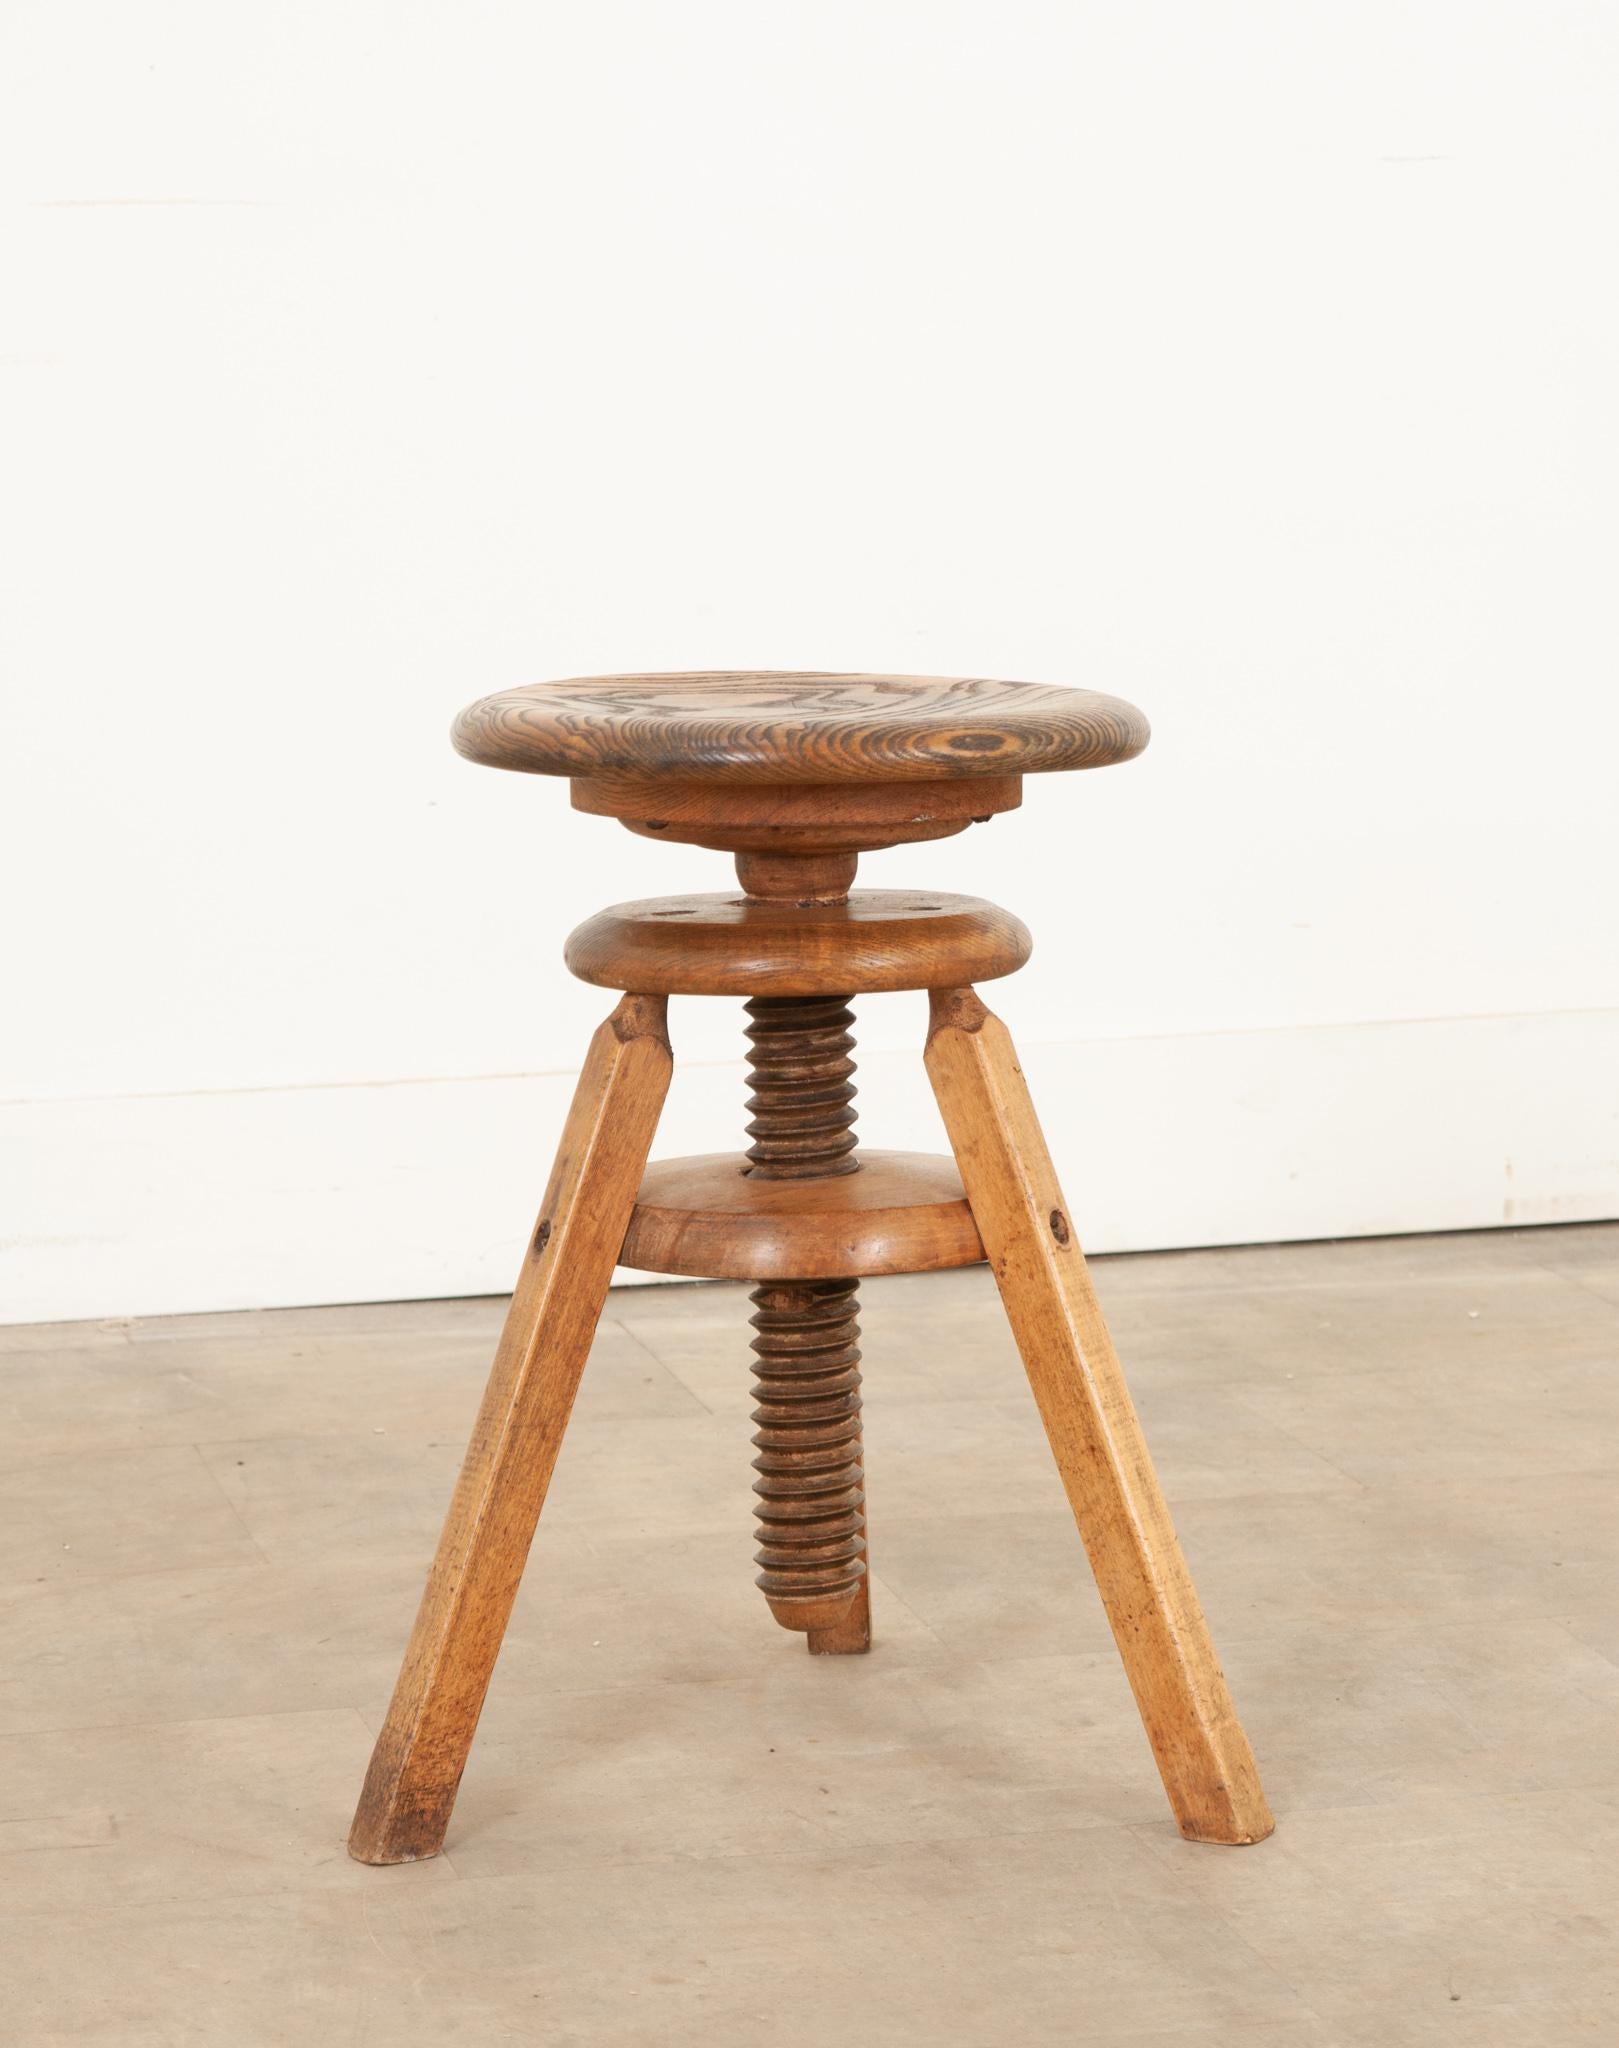 A French 19th century ash adjustable stool with a deep relief twisted-form central column that acts as the mechanism to adjust the height and three sturdy splayed legs. The large wooded screw attached to the seat allows the stool to change heights